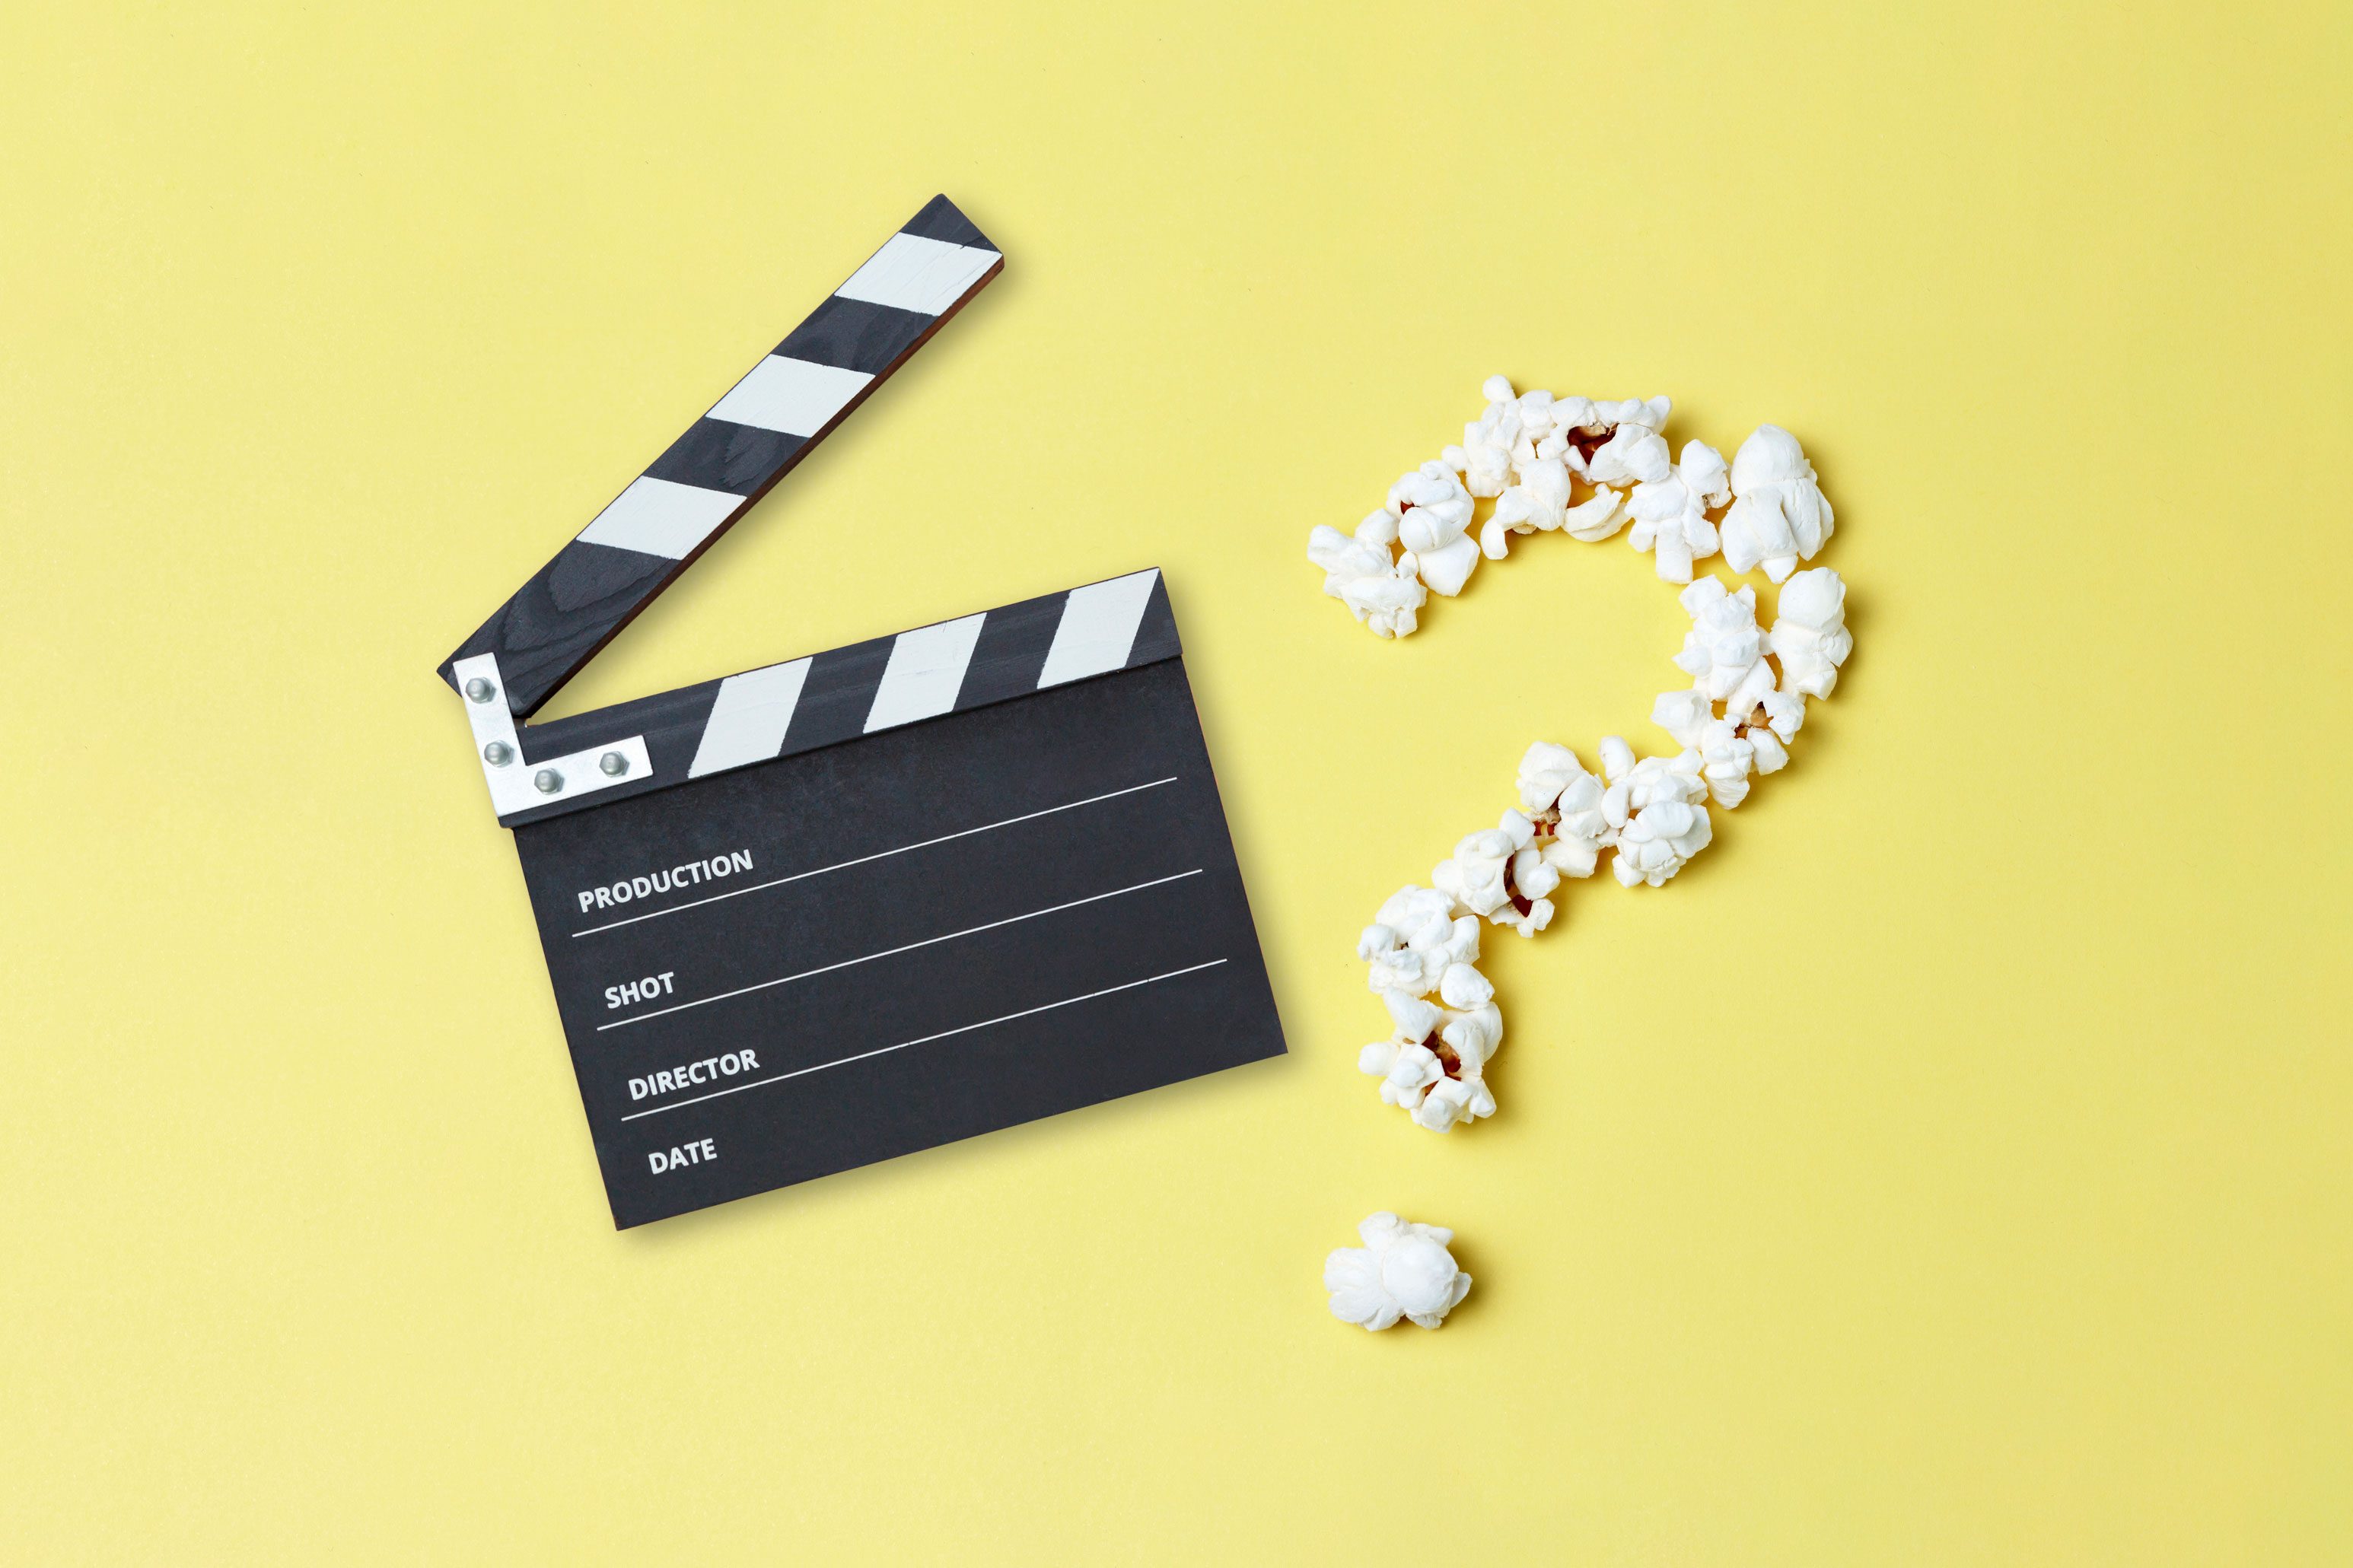 Open Hollywood clapperboard next to popcorn in the shape of a question mark